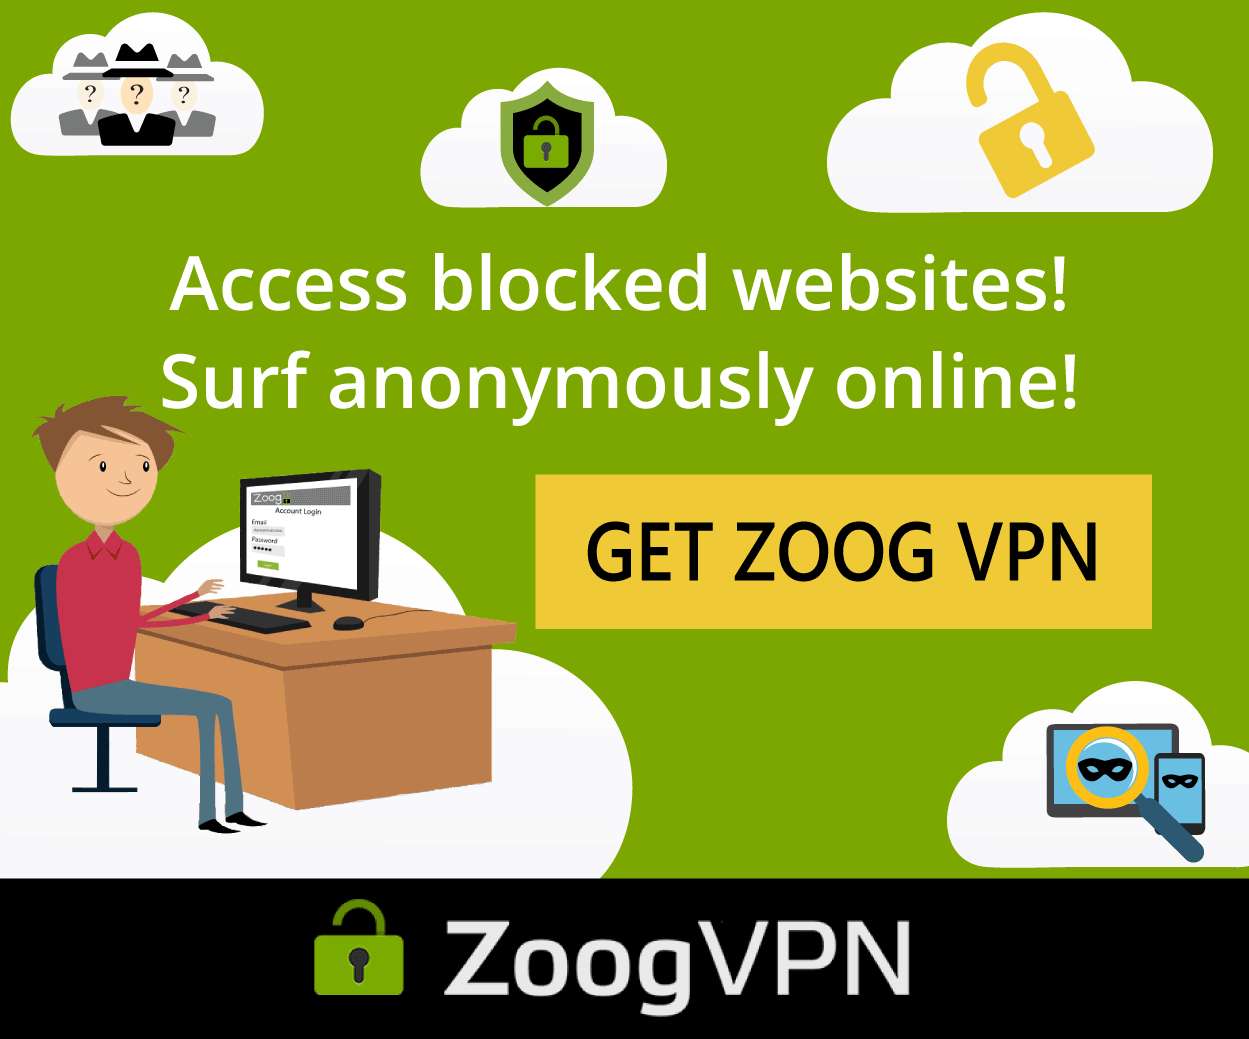 Zoog VPN for PC & Android Licence Free For 6 Months